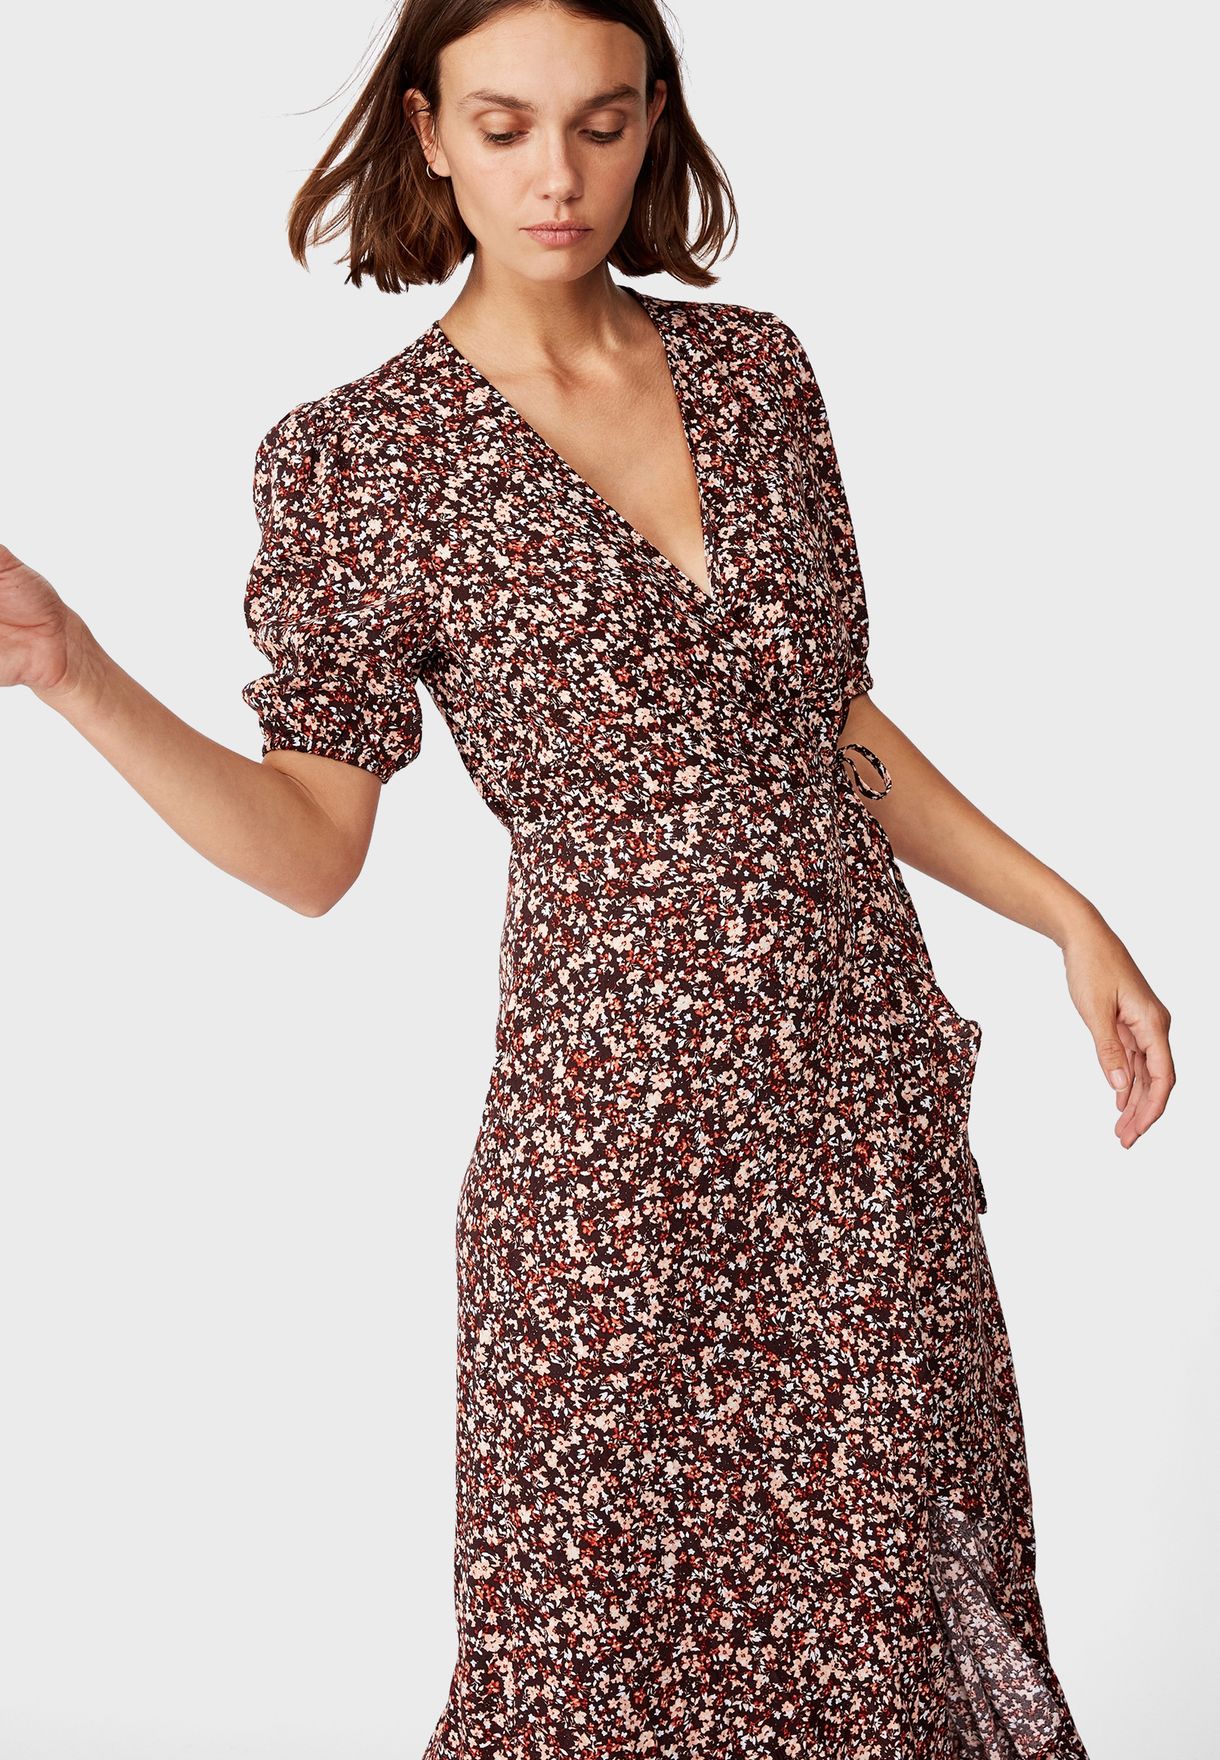 Cotton On Wrap Dress Clearance Sale, UP TO 60% OFF | armeriamunoz.com